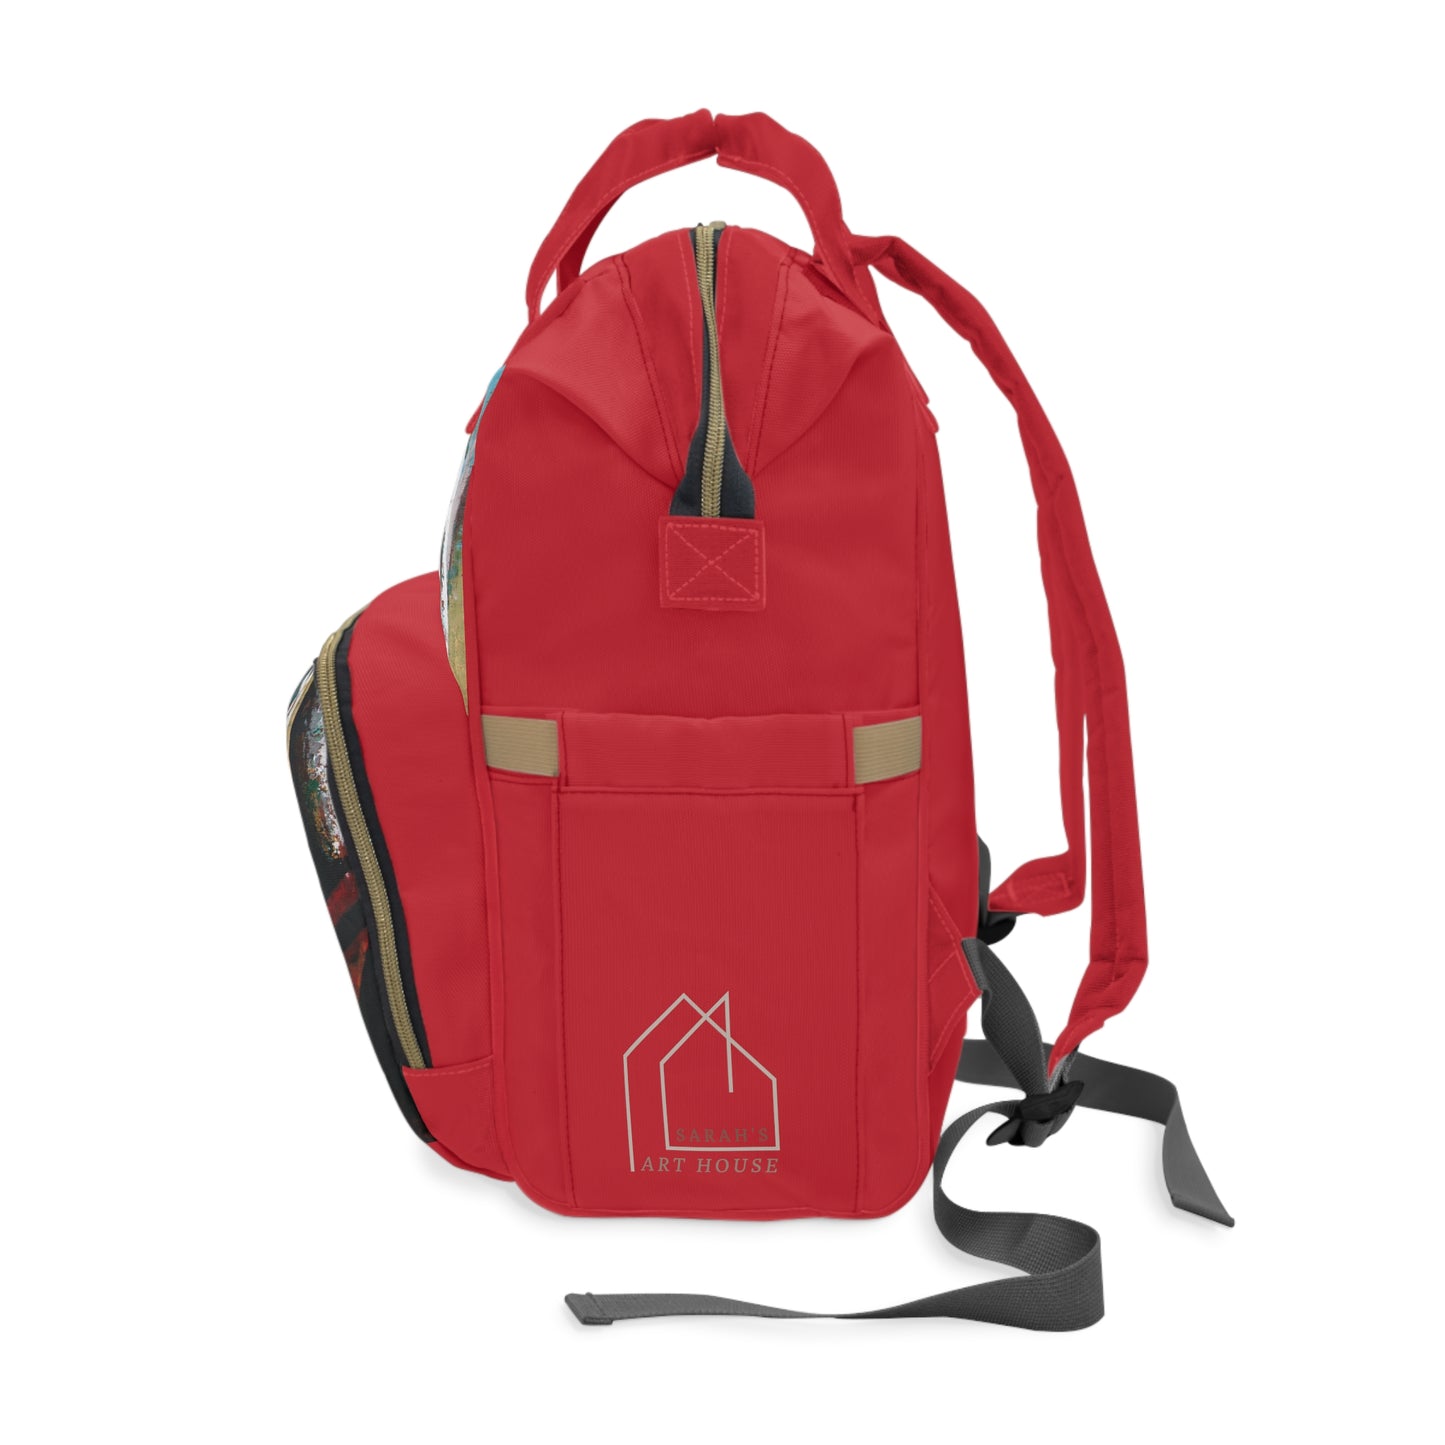 Backpack - Book Bag- Multipurpose Backpack - At the end of the day - Red